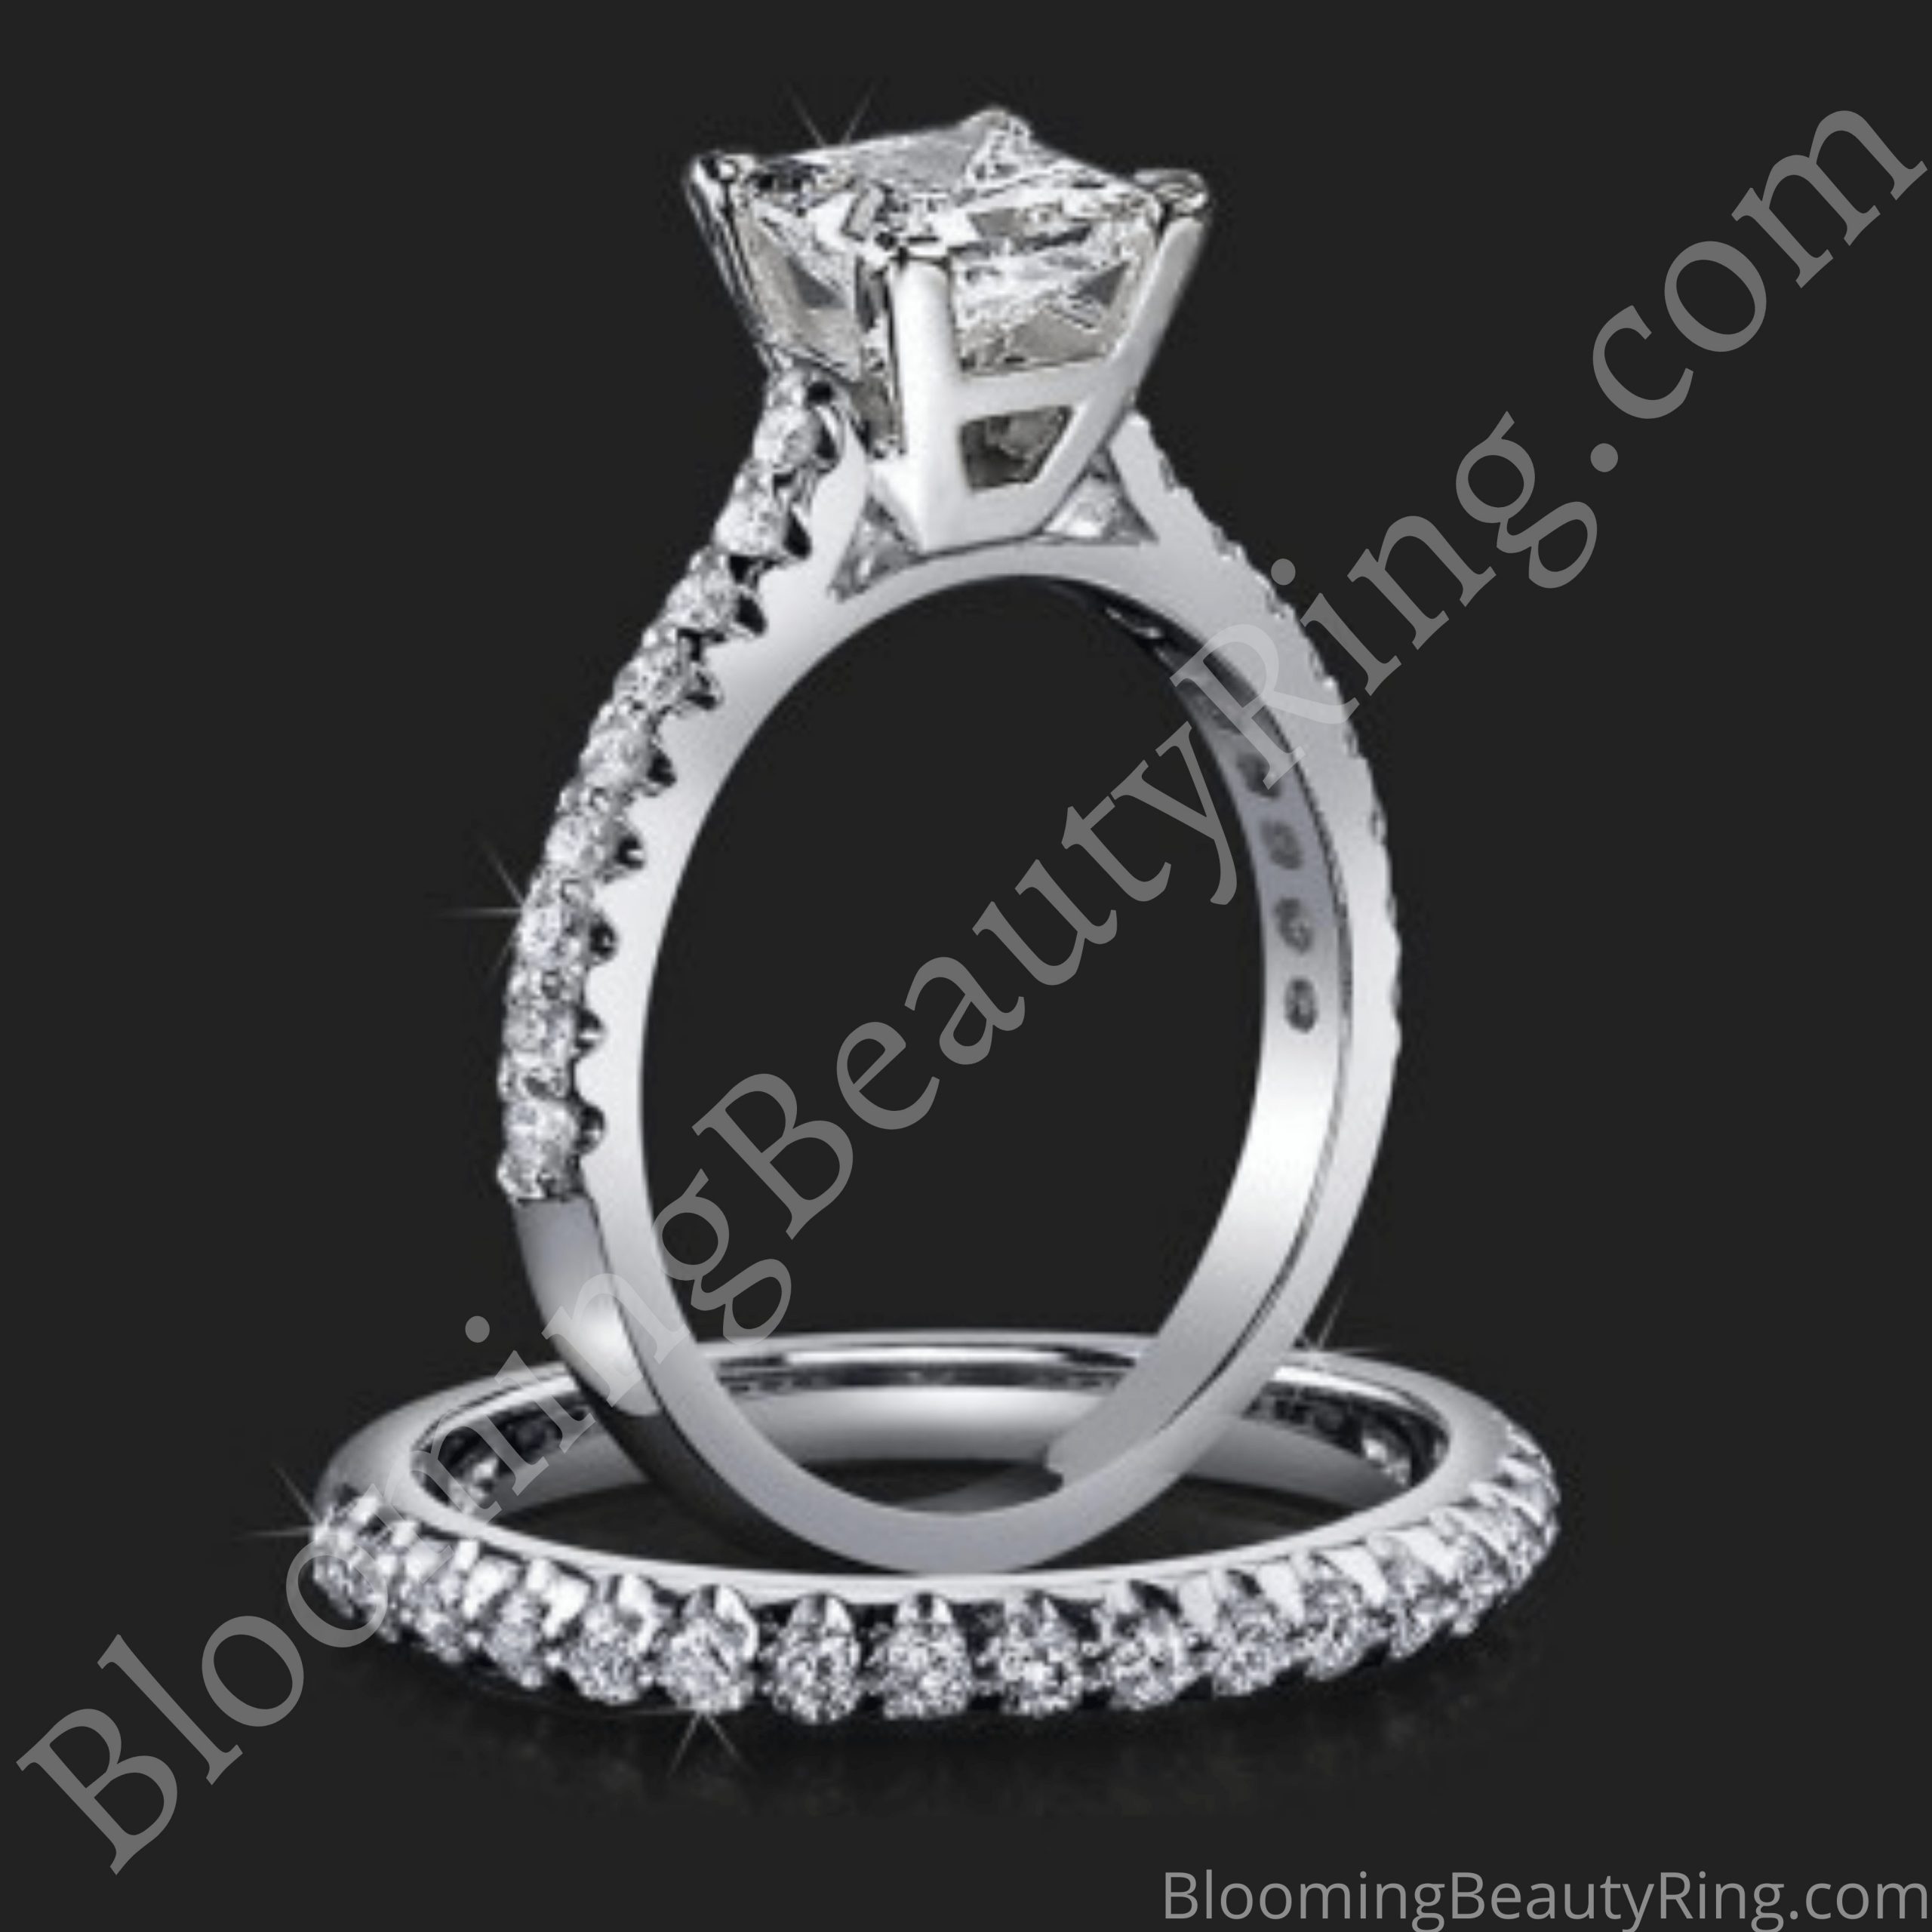 Jewelers Solitaire Princess Diamond Engagement Ring with Matching Wedding Ring